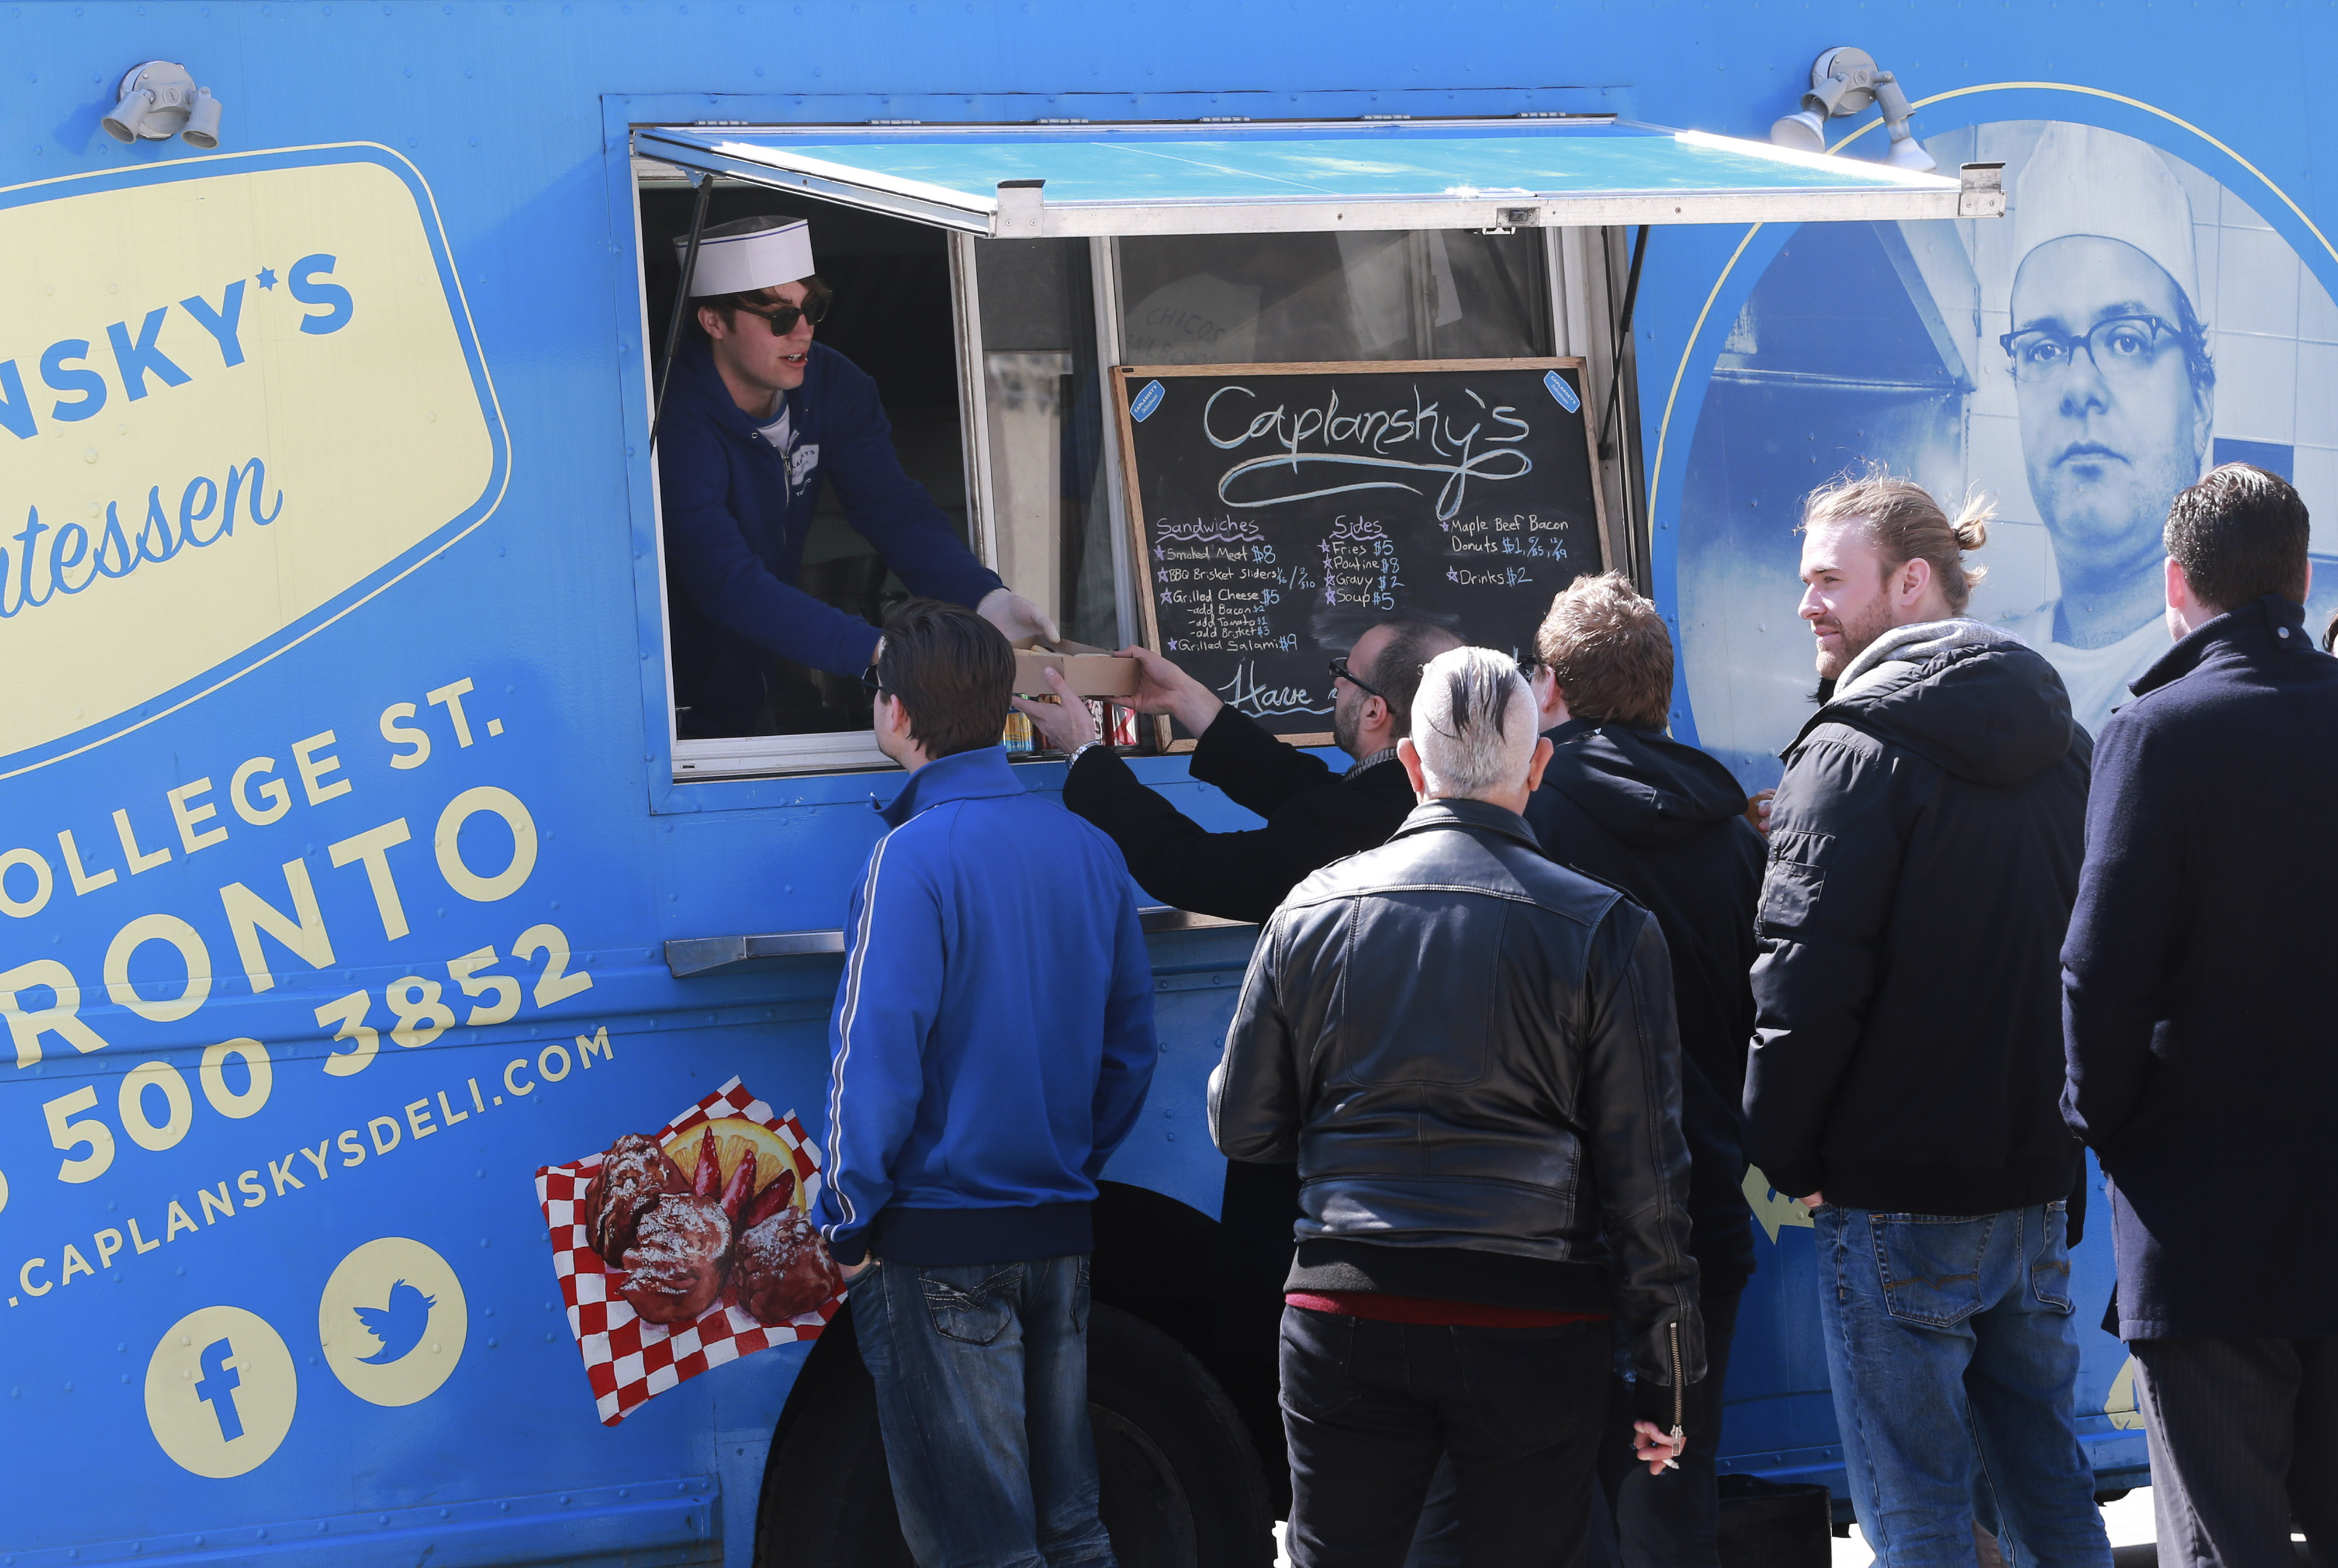 Food trucks gather at Nathan Phillips Square in Toronto on April 2, 2014. (Andrew Francis —Toronto Star/Getty Images)